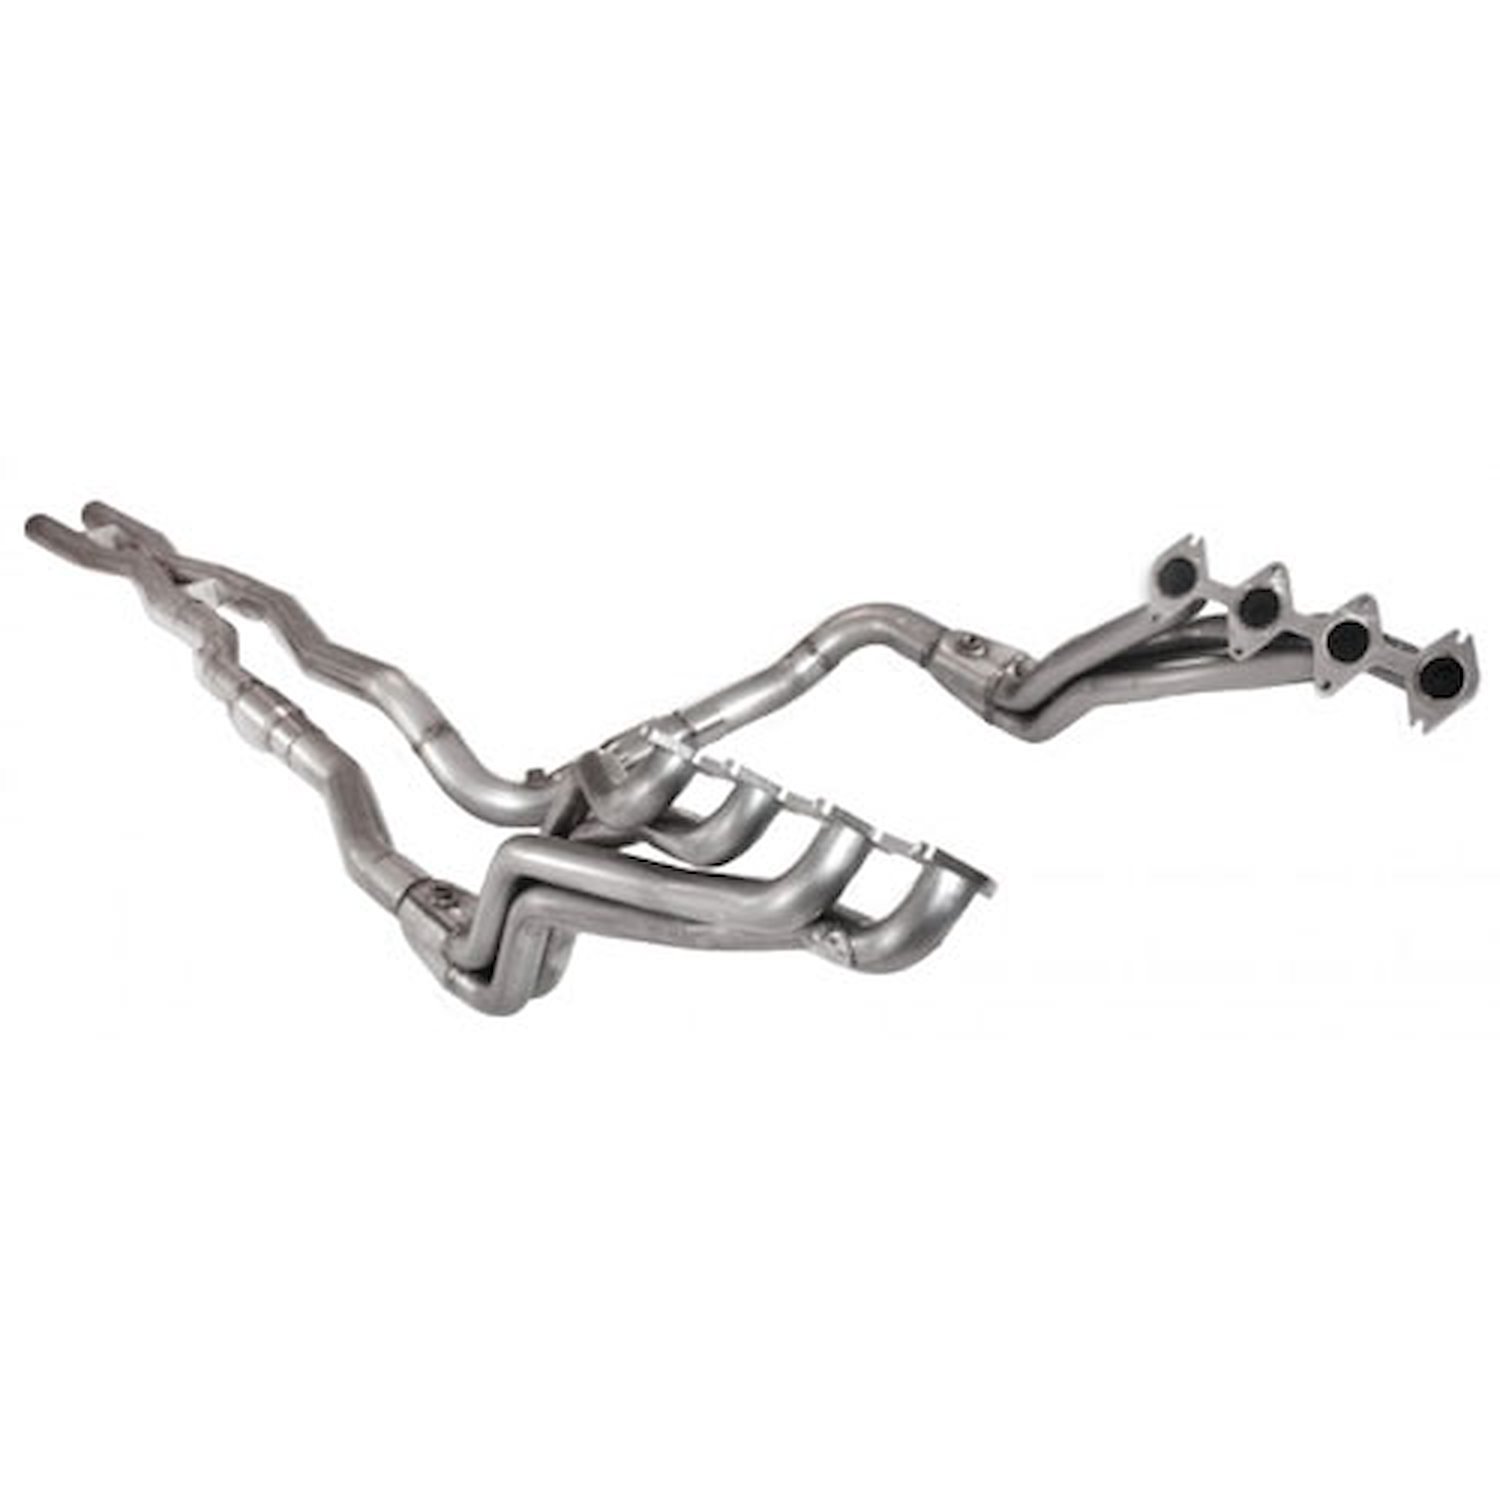 2009-2010 Ford F-150 5.4L 2WD 4WD Truck headers with 1.750 dia. primaries and 2.5 slip fit collector